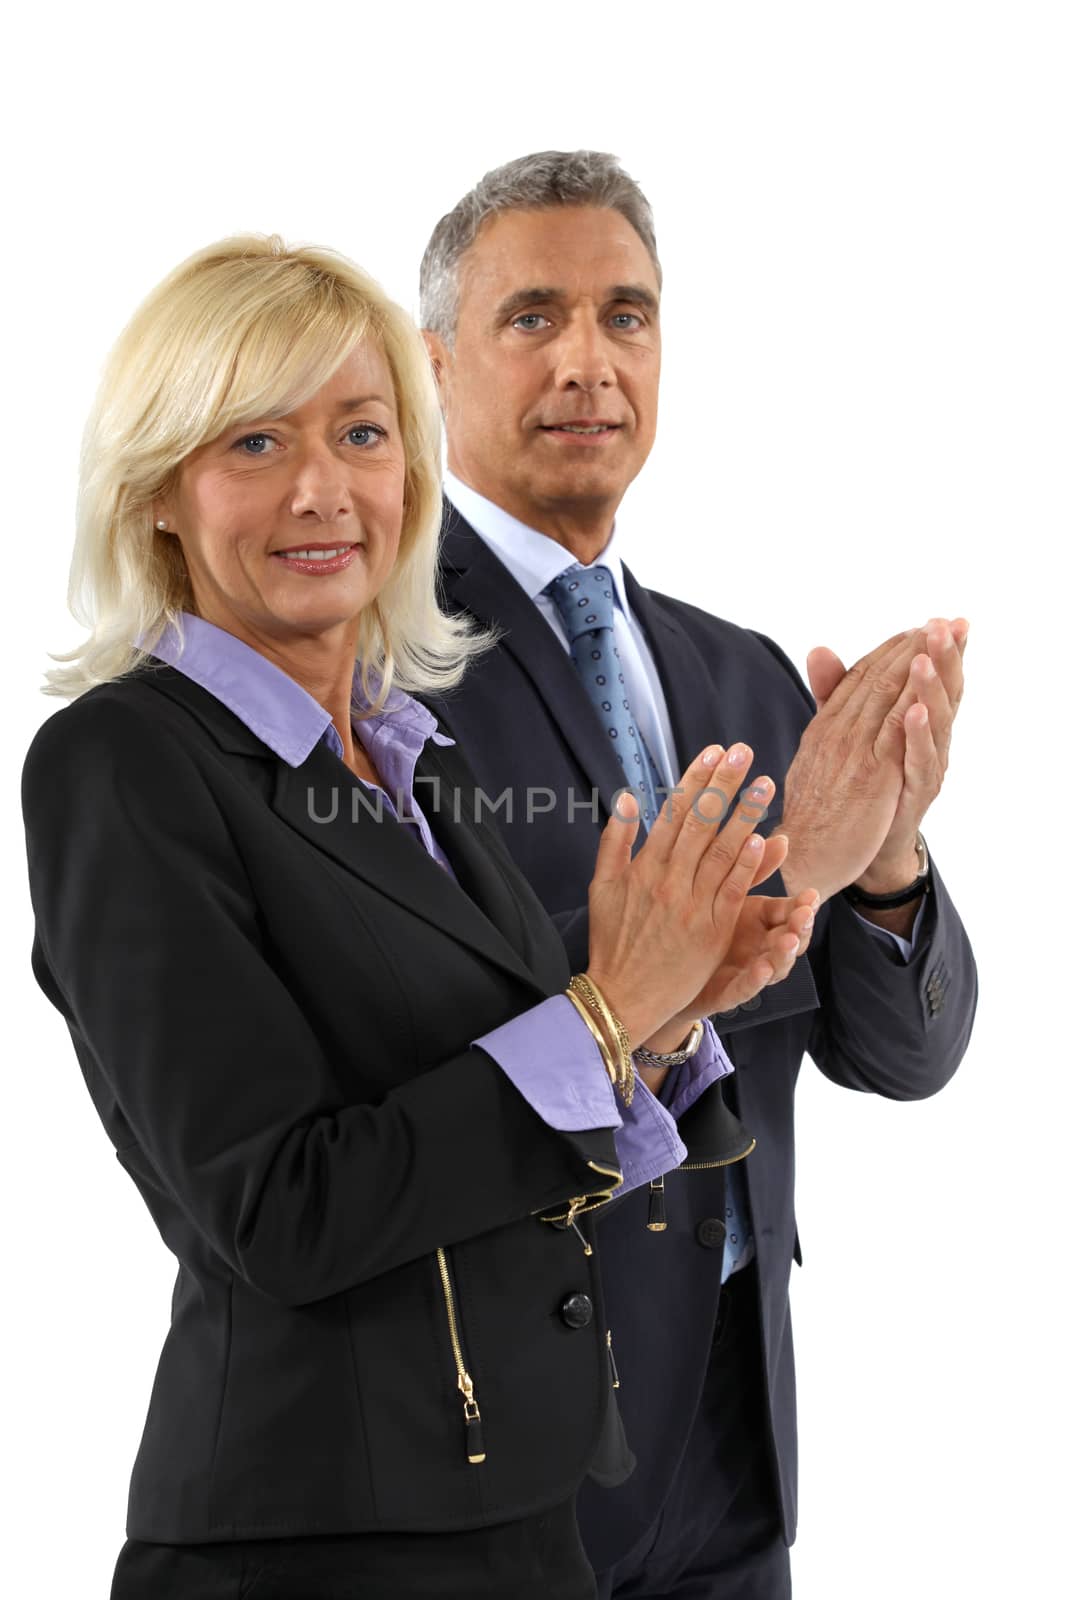 Business professionals clapping their hands